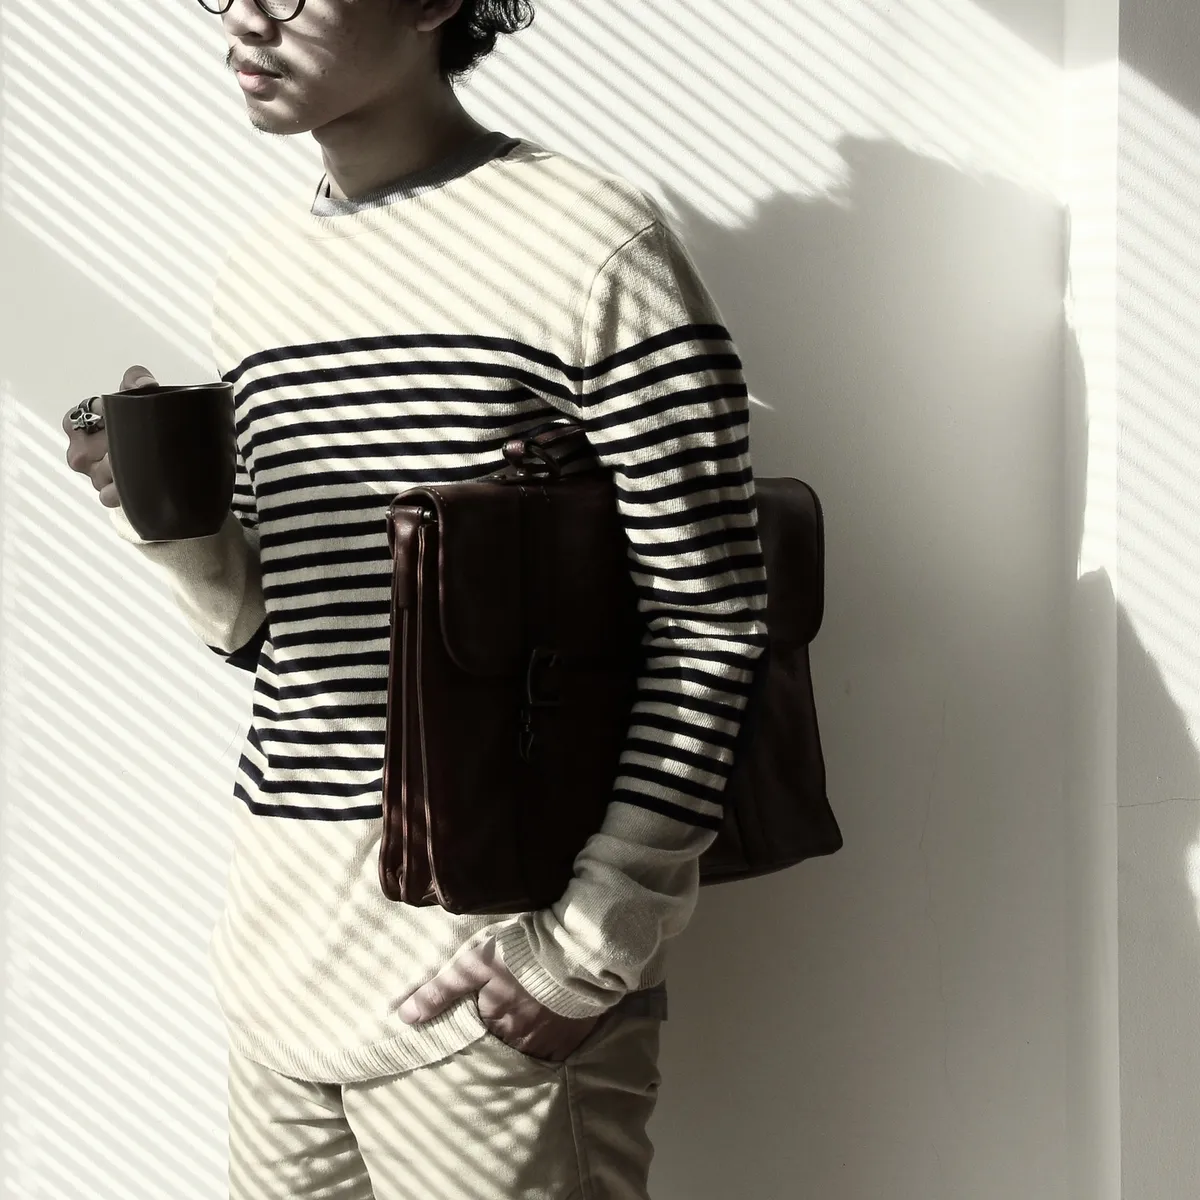 A man in striped shirt holding a bag.